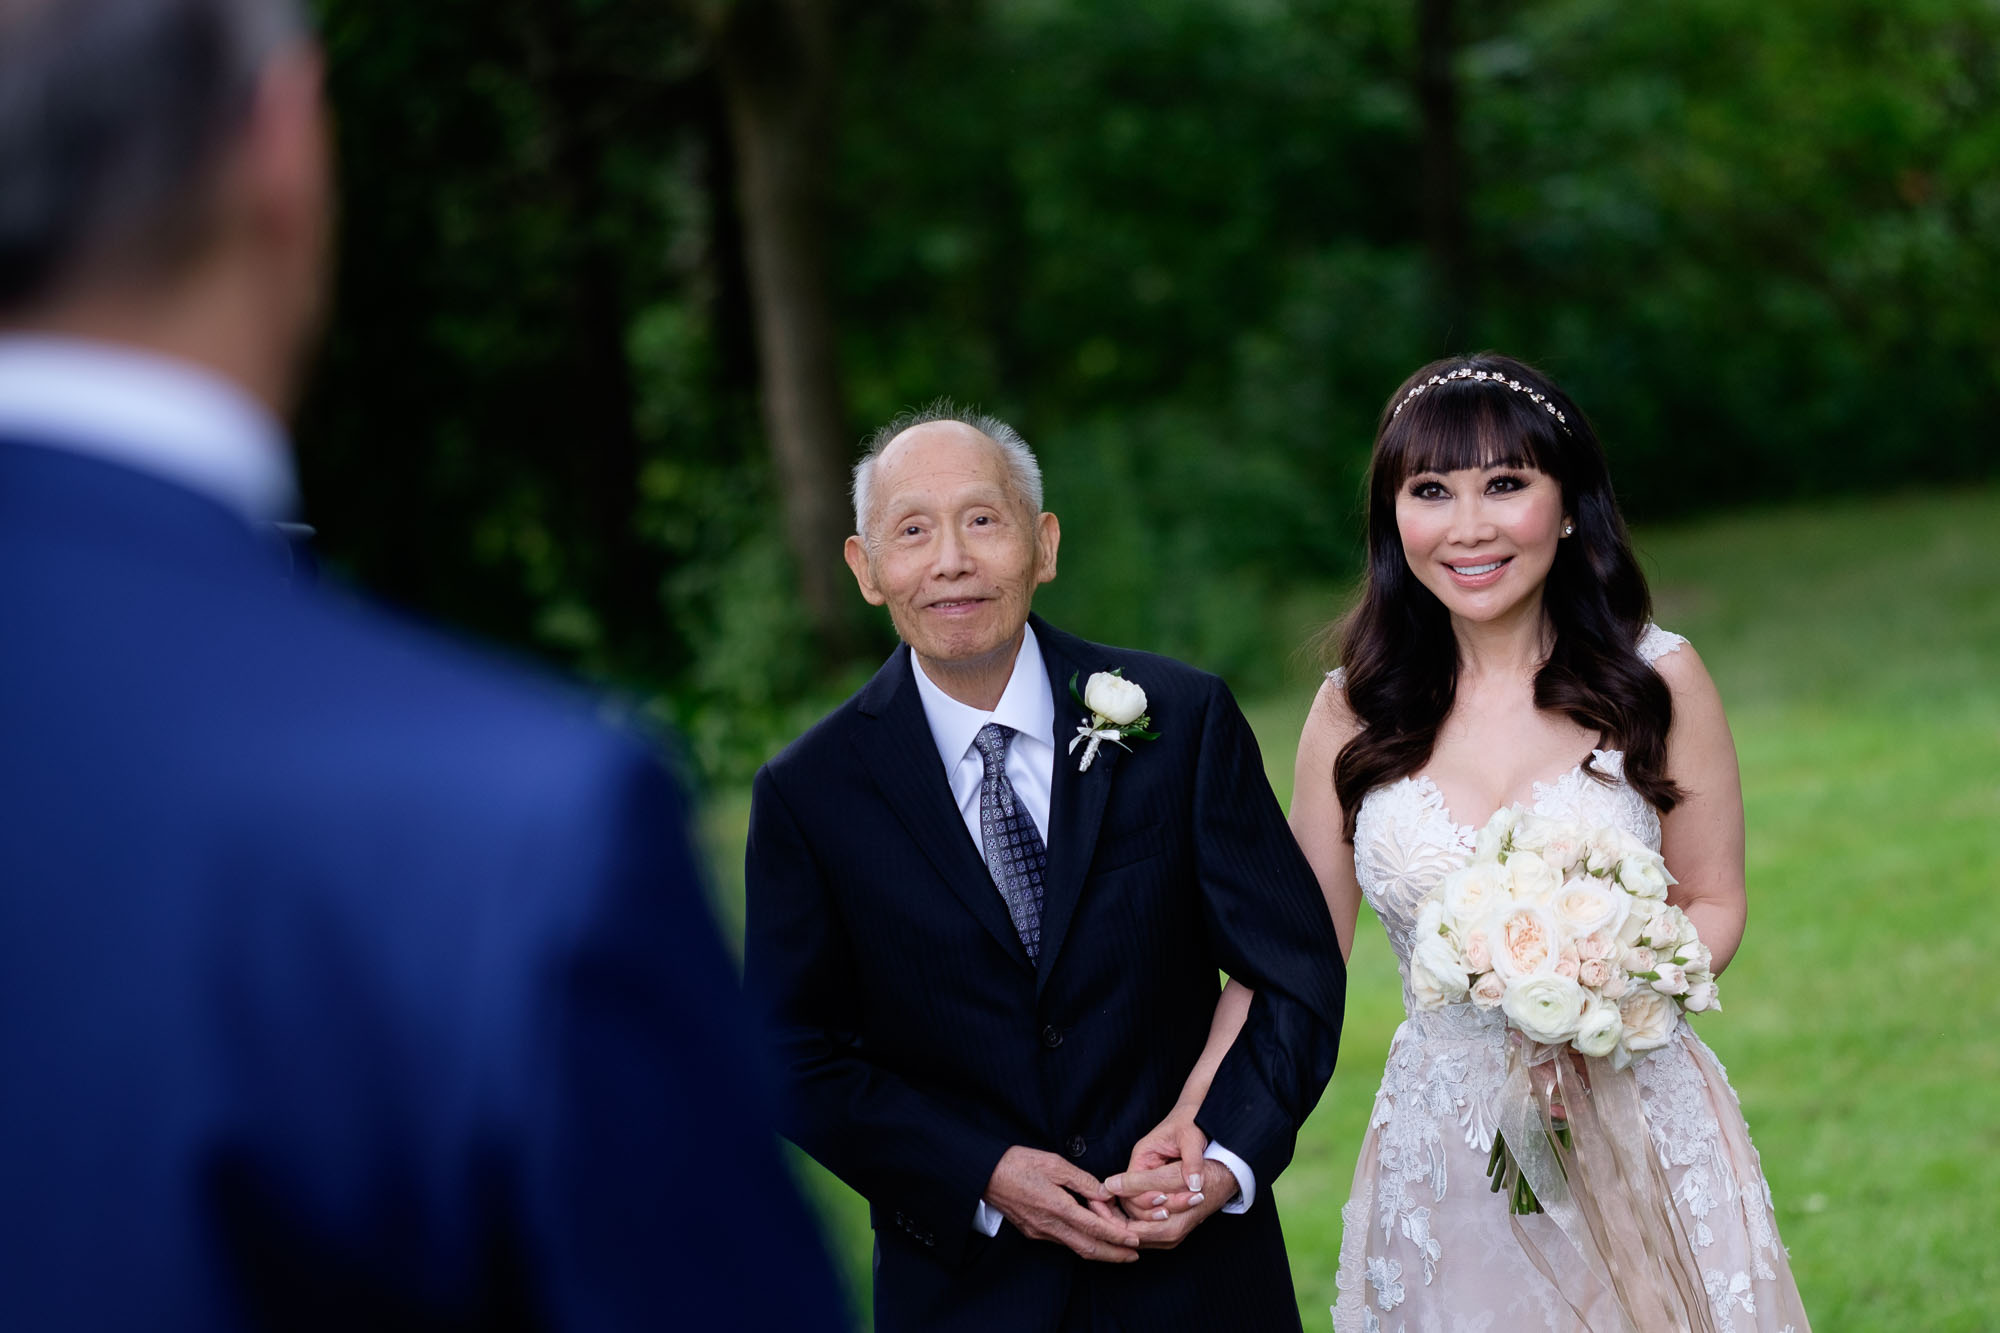  Teresa walks down the aisle in the arms of her father during their outdoor wedding ceremony at Langdon Hall in Cambridge, Ontario by Scott Williams. 